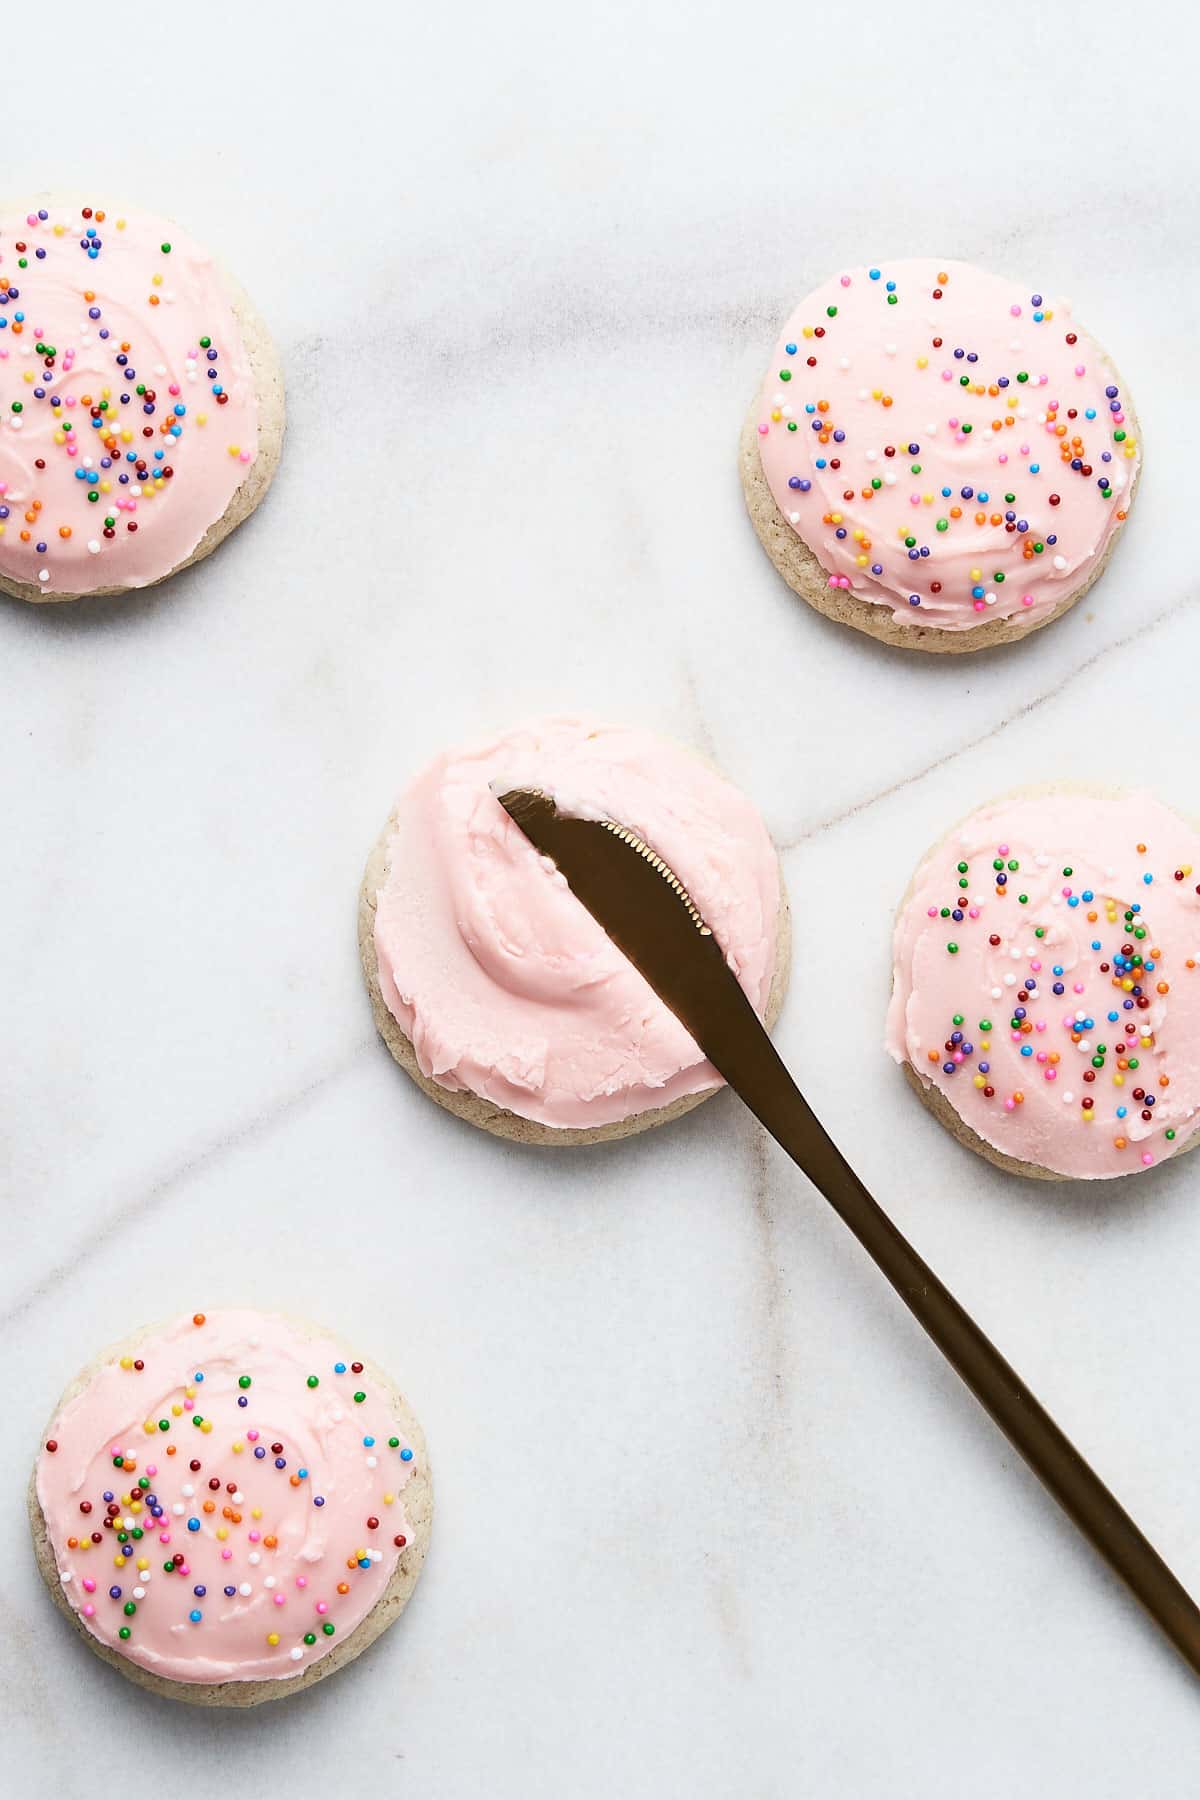 Sugar cookies being frosting with a butterknife and decorated with sprinkles.